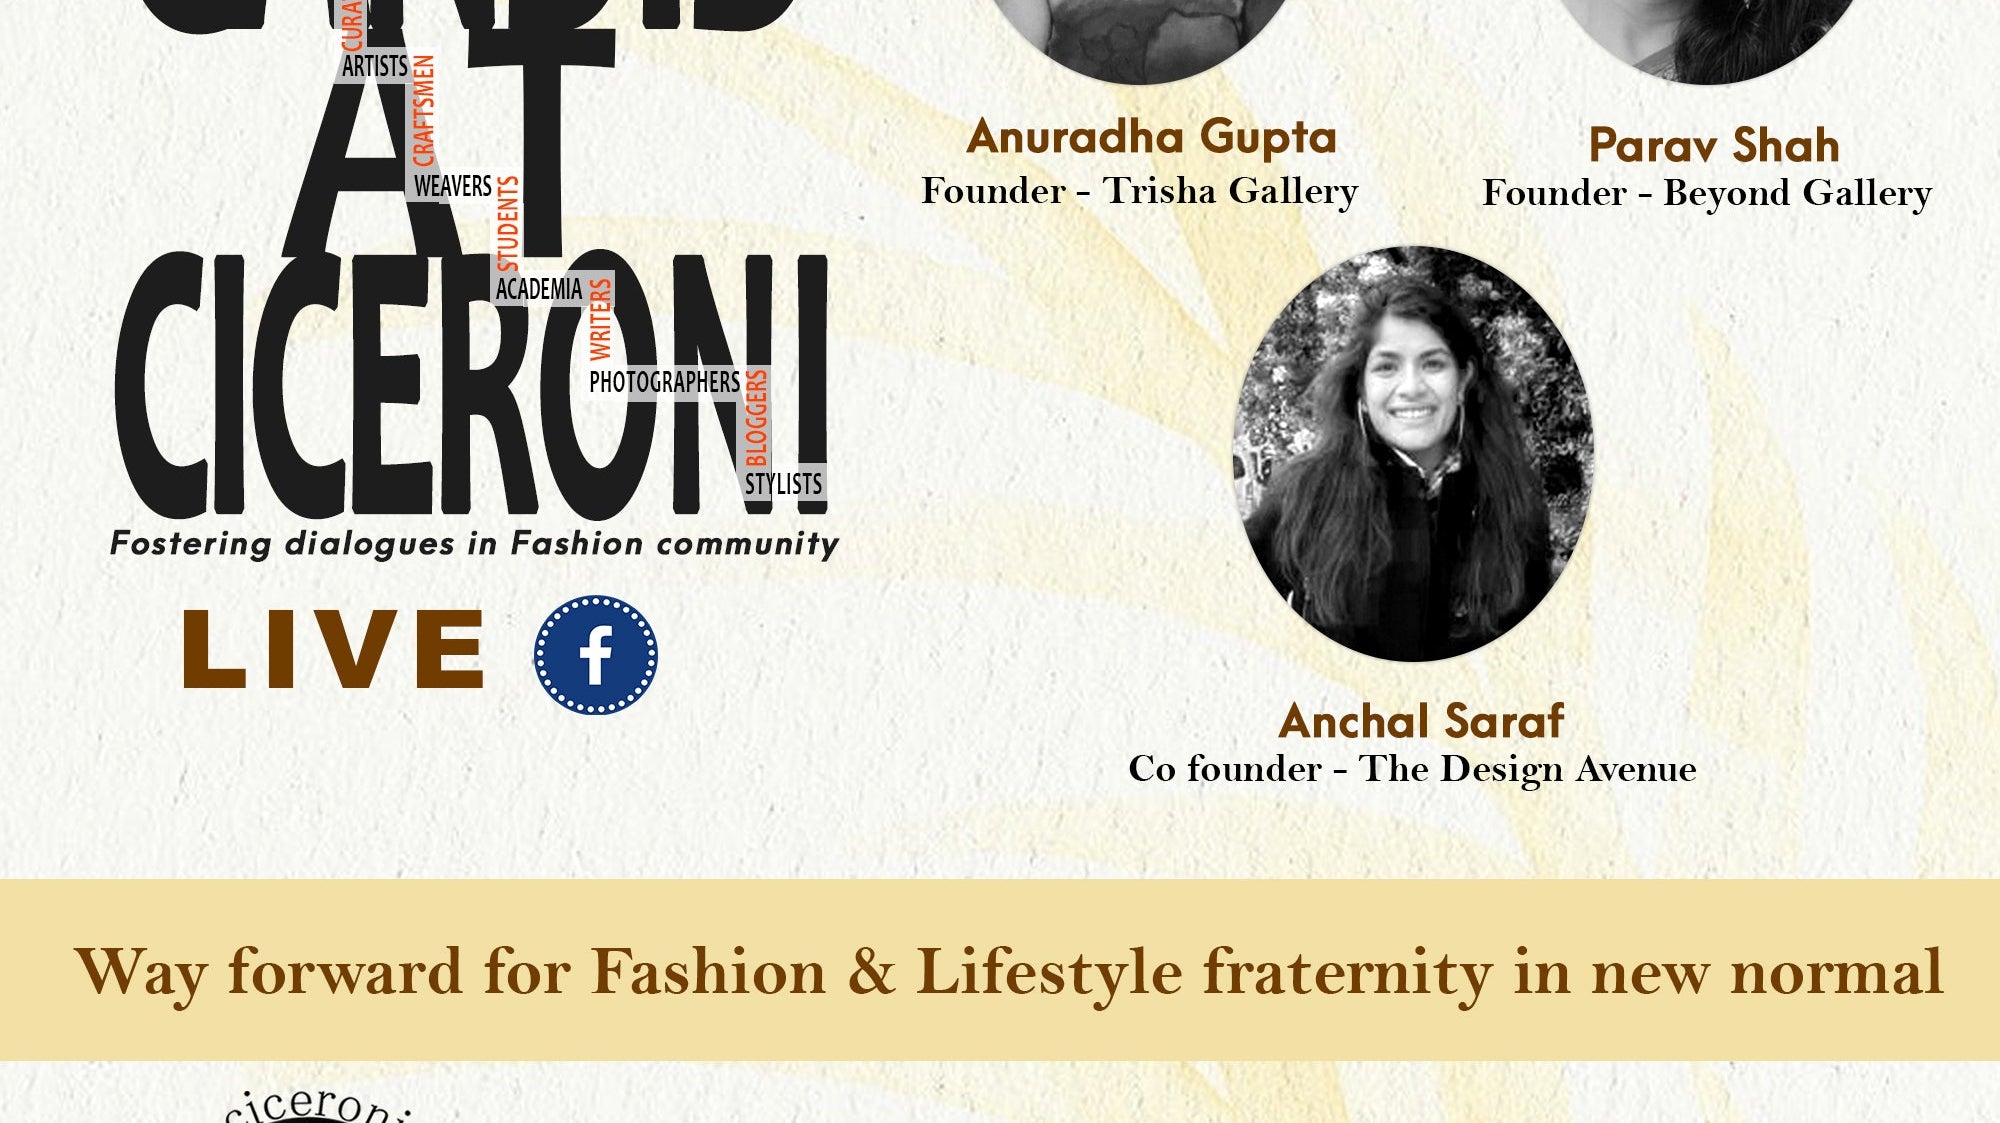 Future of Fashion and Lifestyle Business in Gujarat - Ciceroni